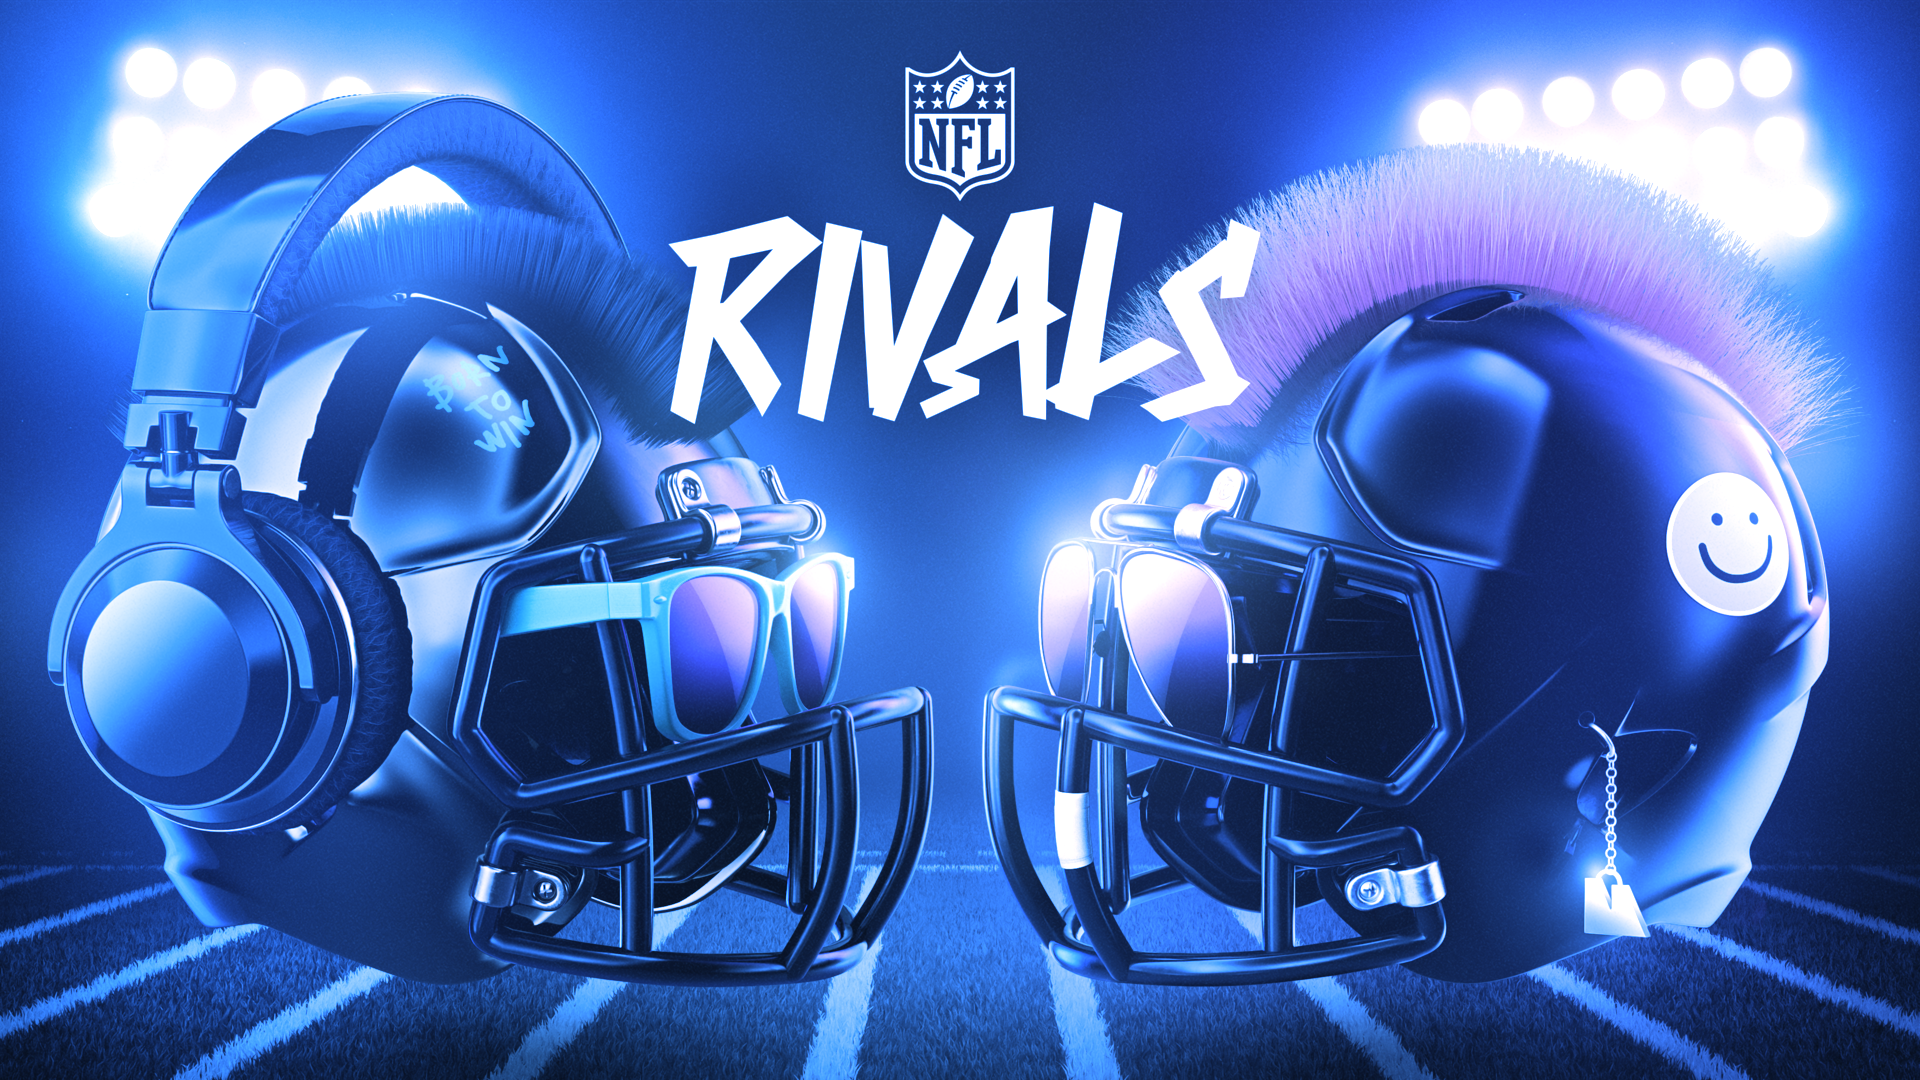 NFL and Mythical Games to Launch 'Play-and-Own' NFT Game 'NFL Rivals'